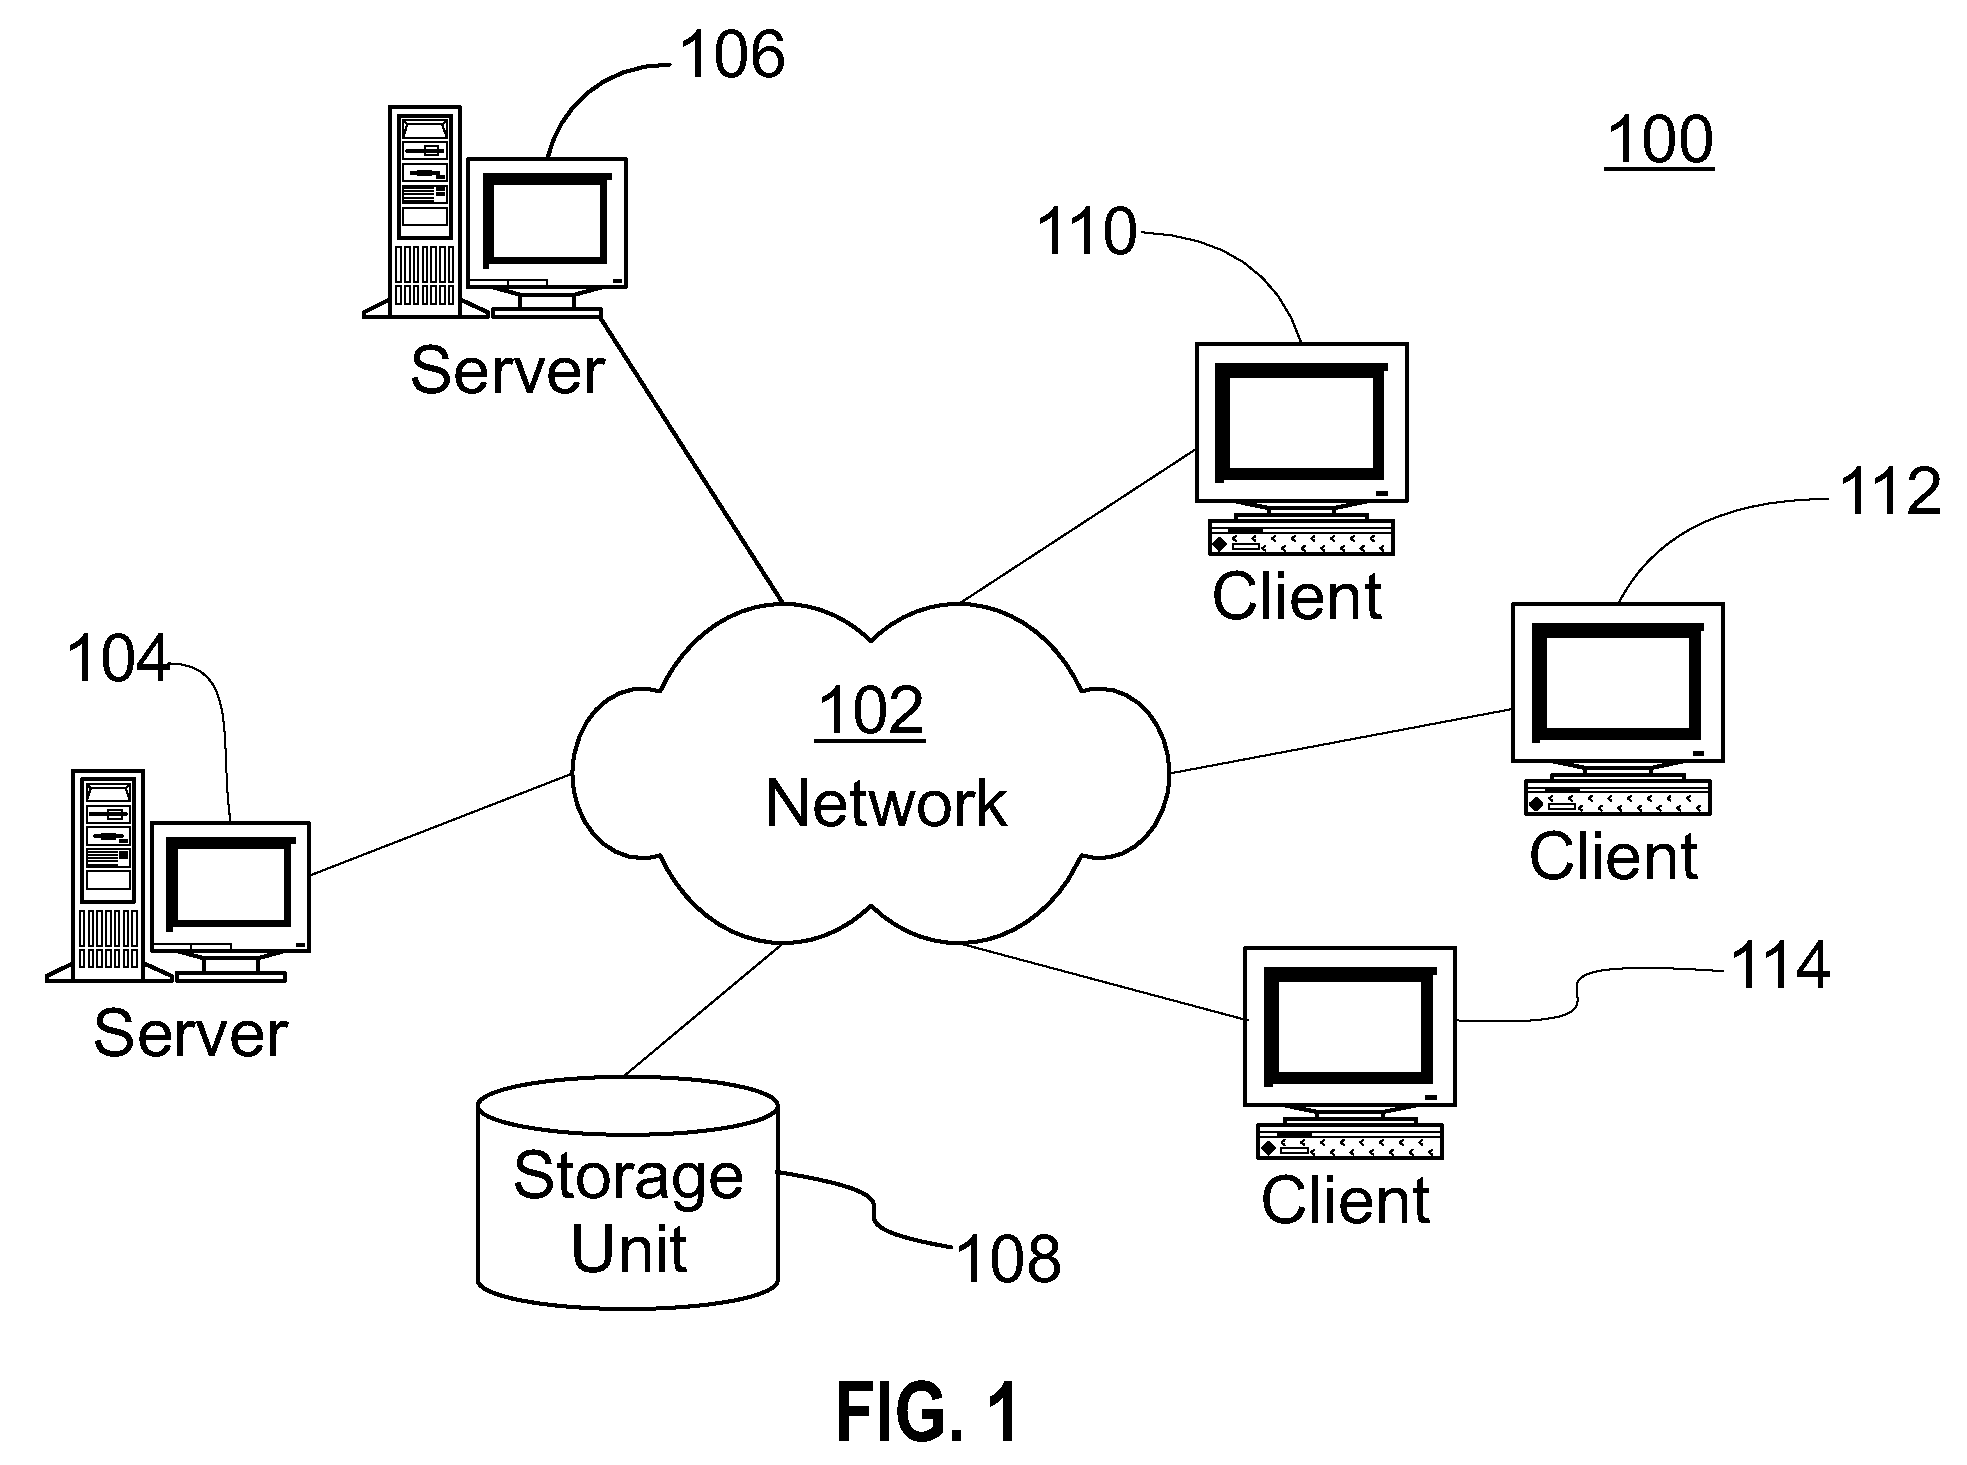 Method and apparatus for template-based provisioning in a service delivery environment